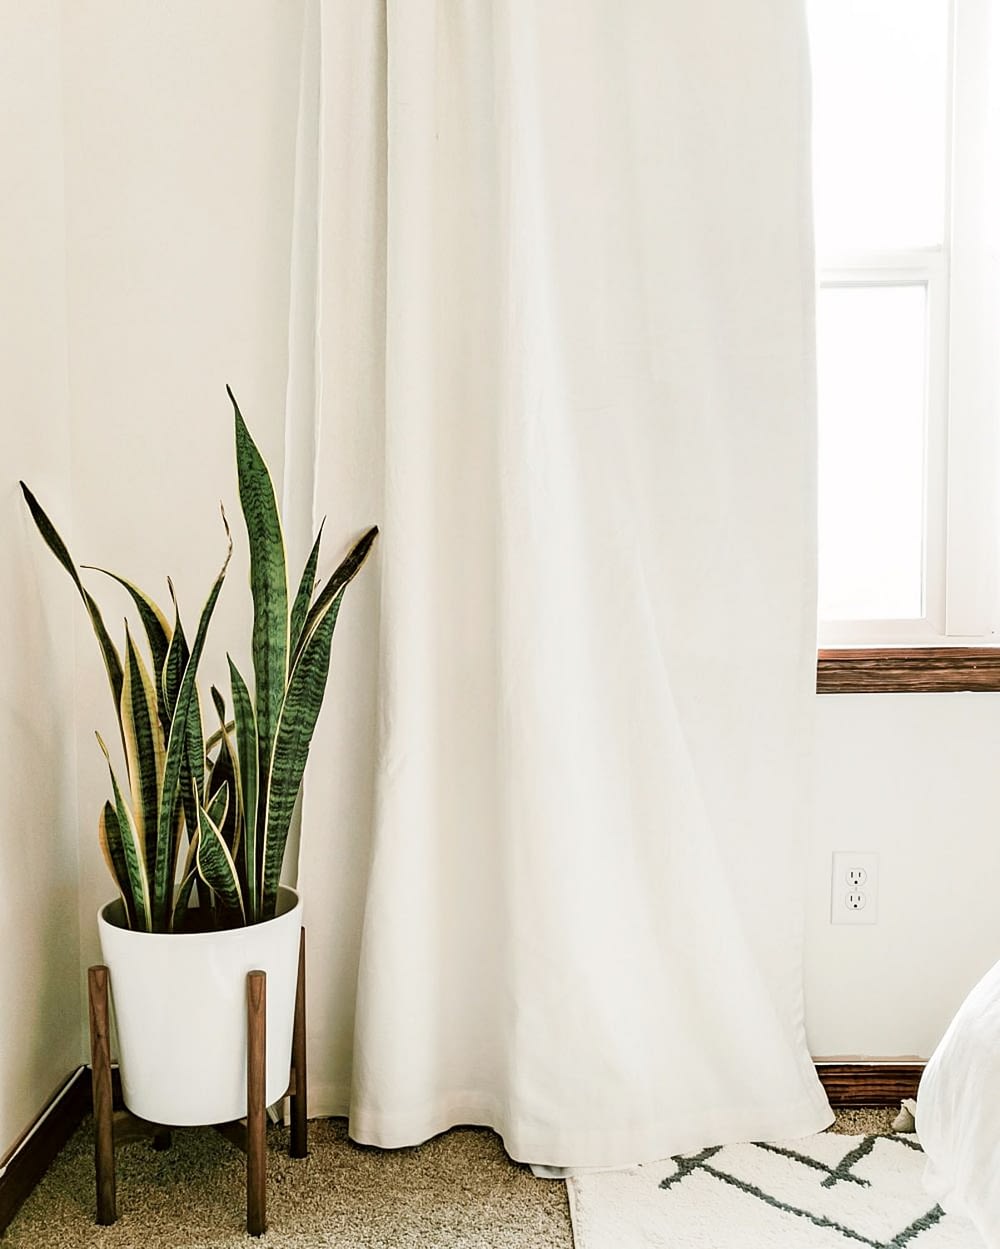 Bedroom with a plant in the corner and light pouring in from the window